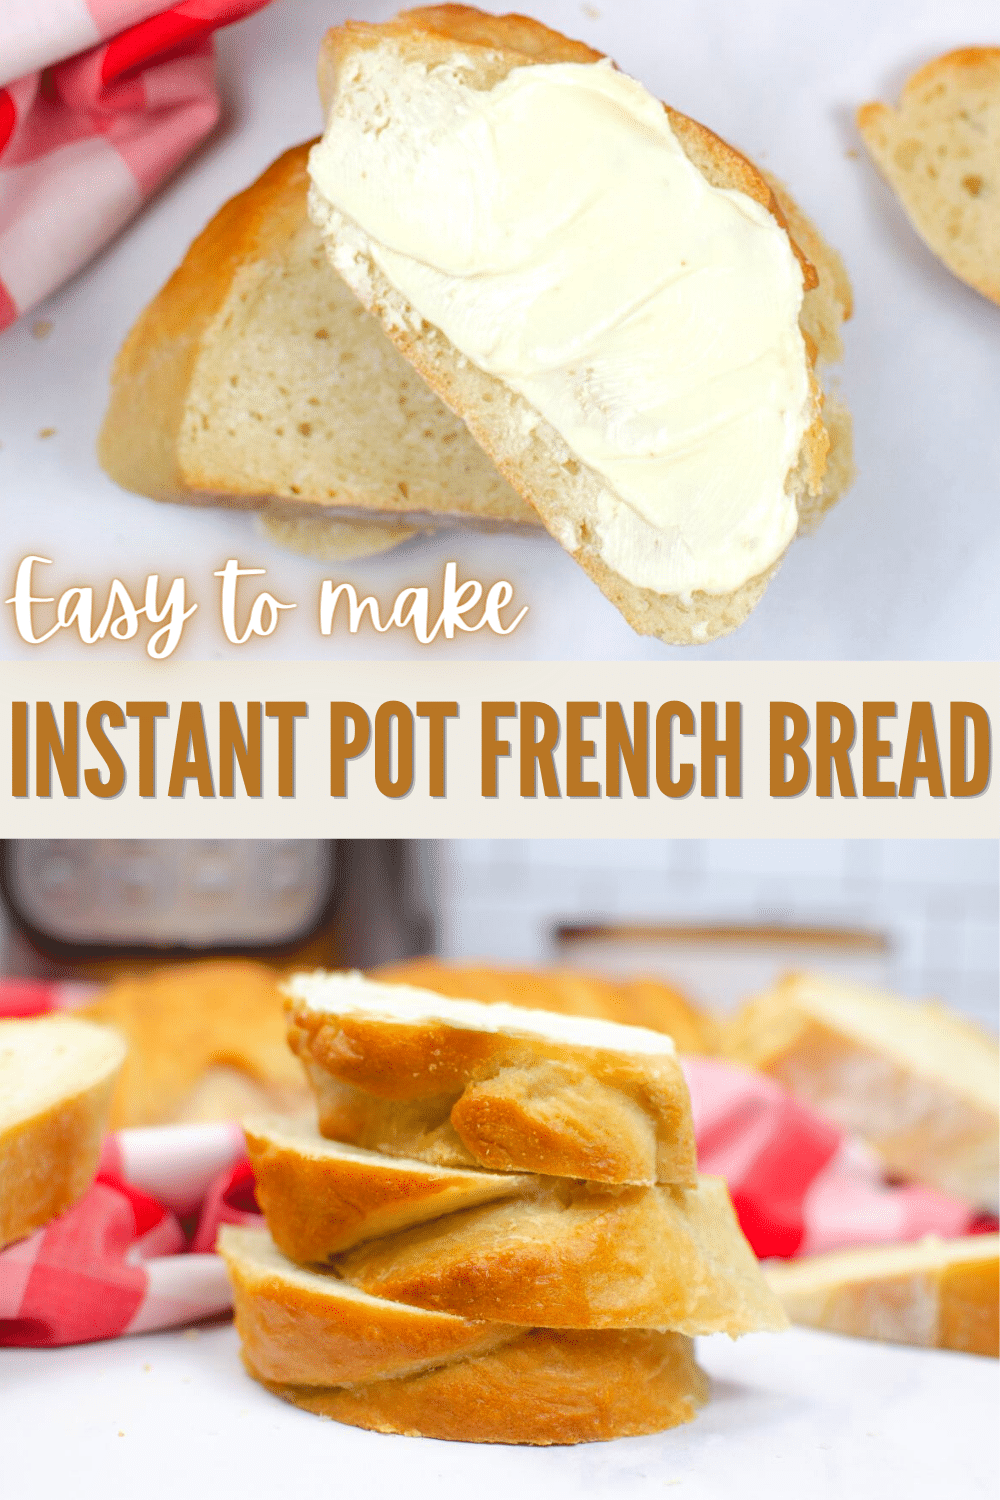 Instant Pot French Bread is crusty on the outside and soft and chewy in the center. It makes a perfect side dish for so many meals! #instantpot #pressurecooker #frenchbread #recipe via @wondermomwannab